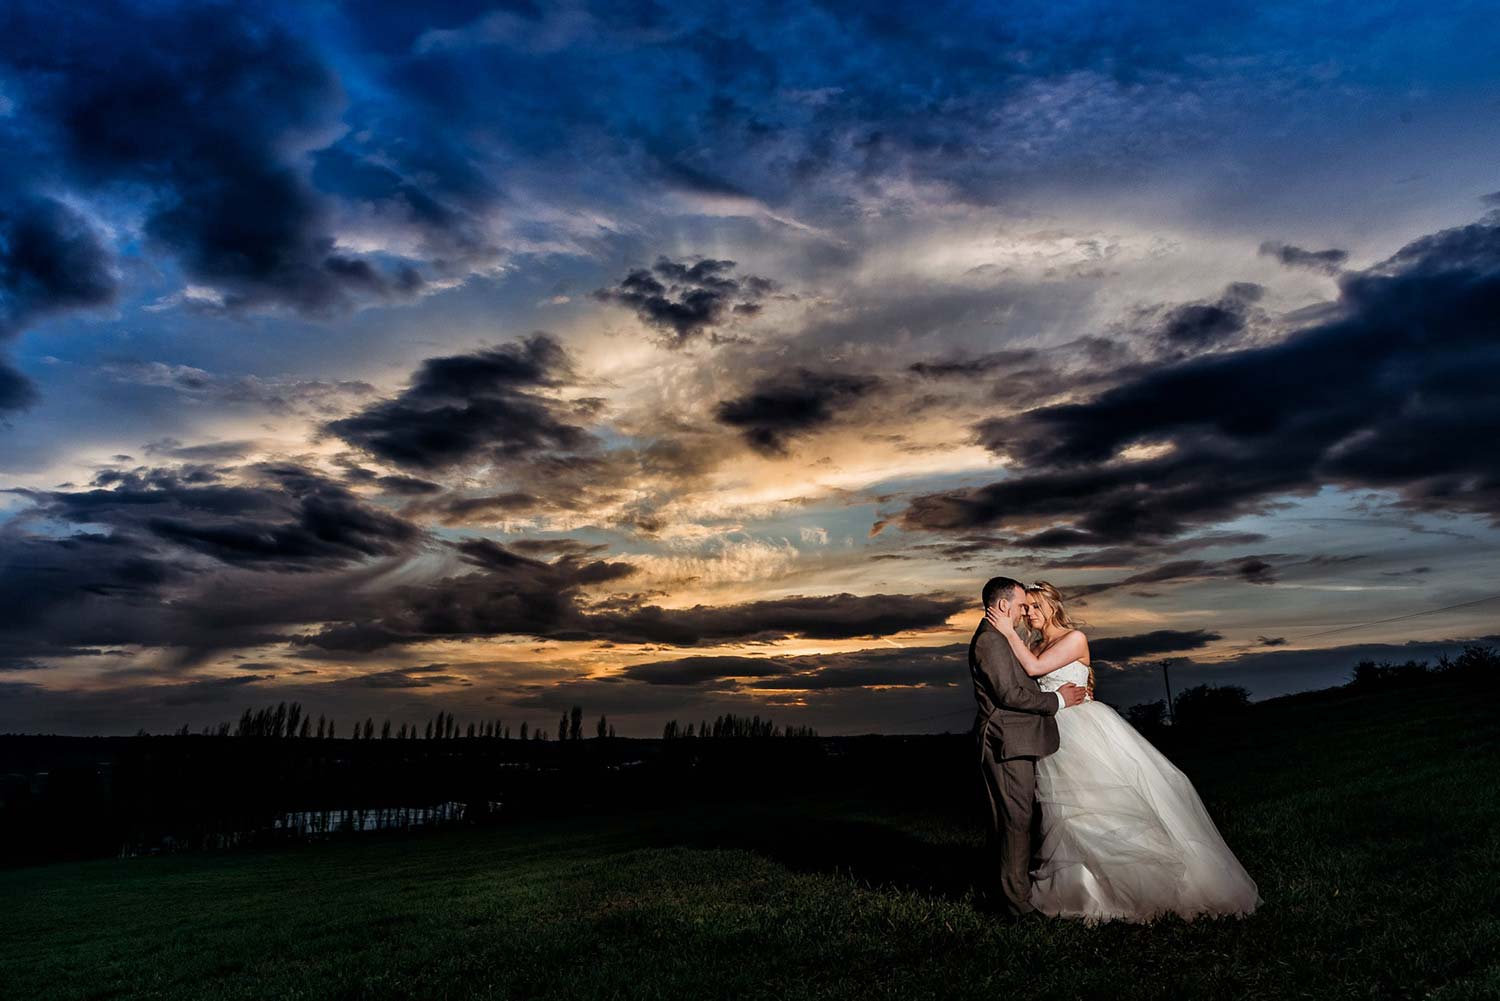 Sunset Wedding Photo at Swancar Farm taken in the field behind this stunning venue